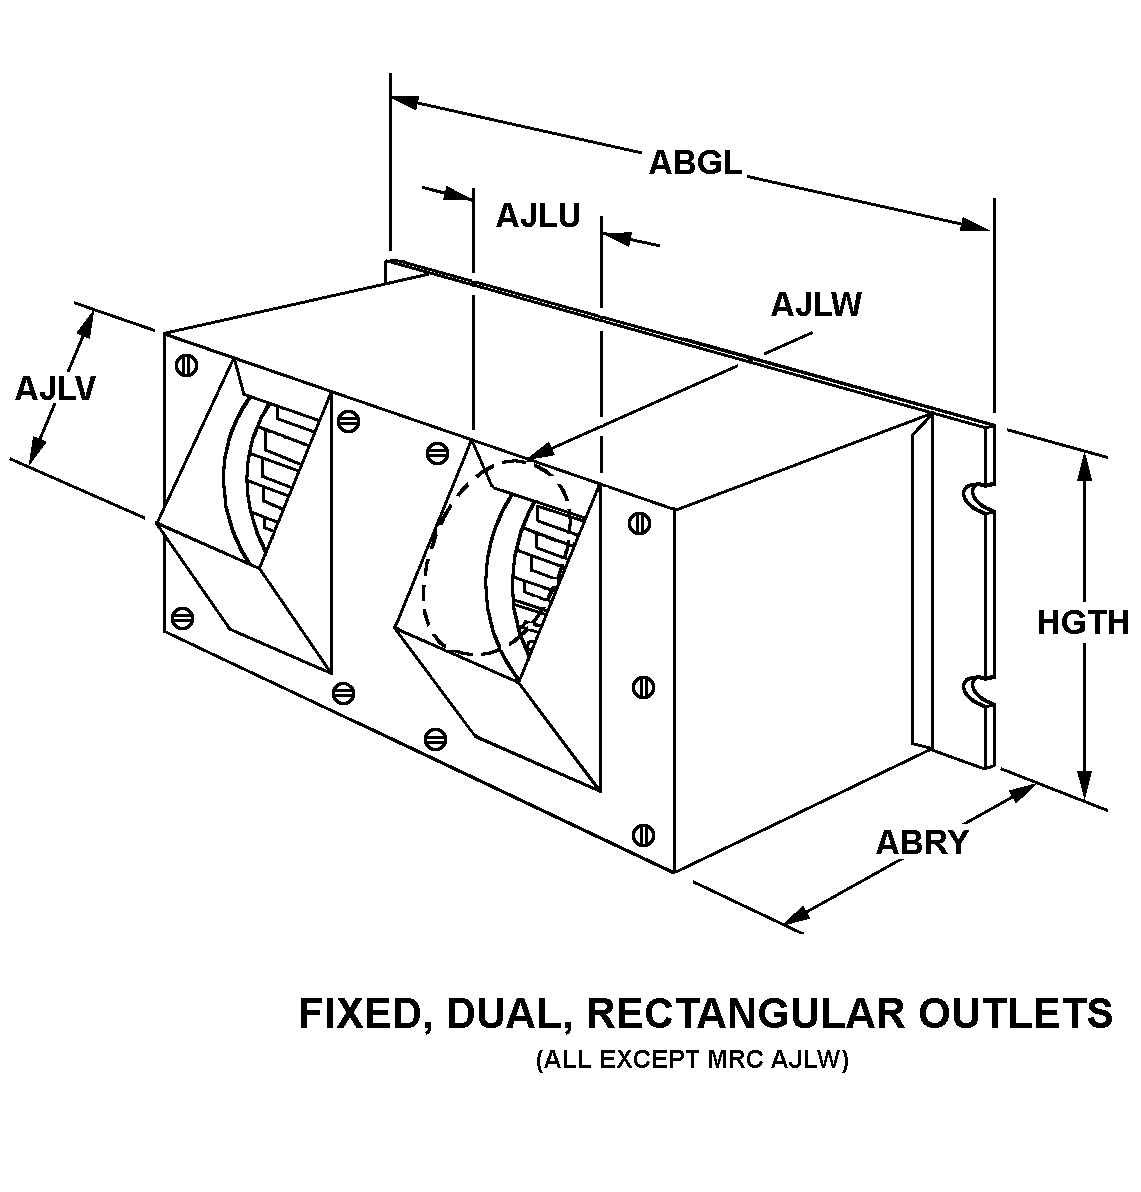 FIXED, DUAL, RECTANGULAR OUTLETS style nsn 4140-01-057-0966